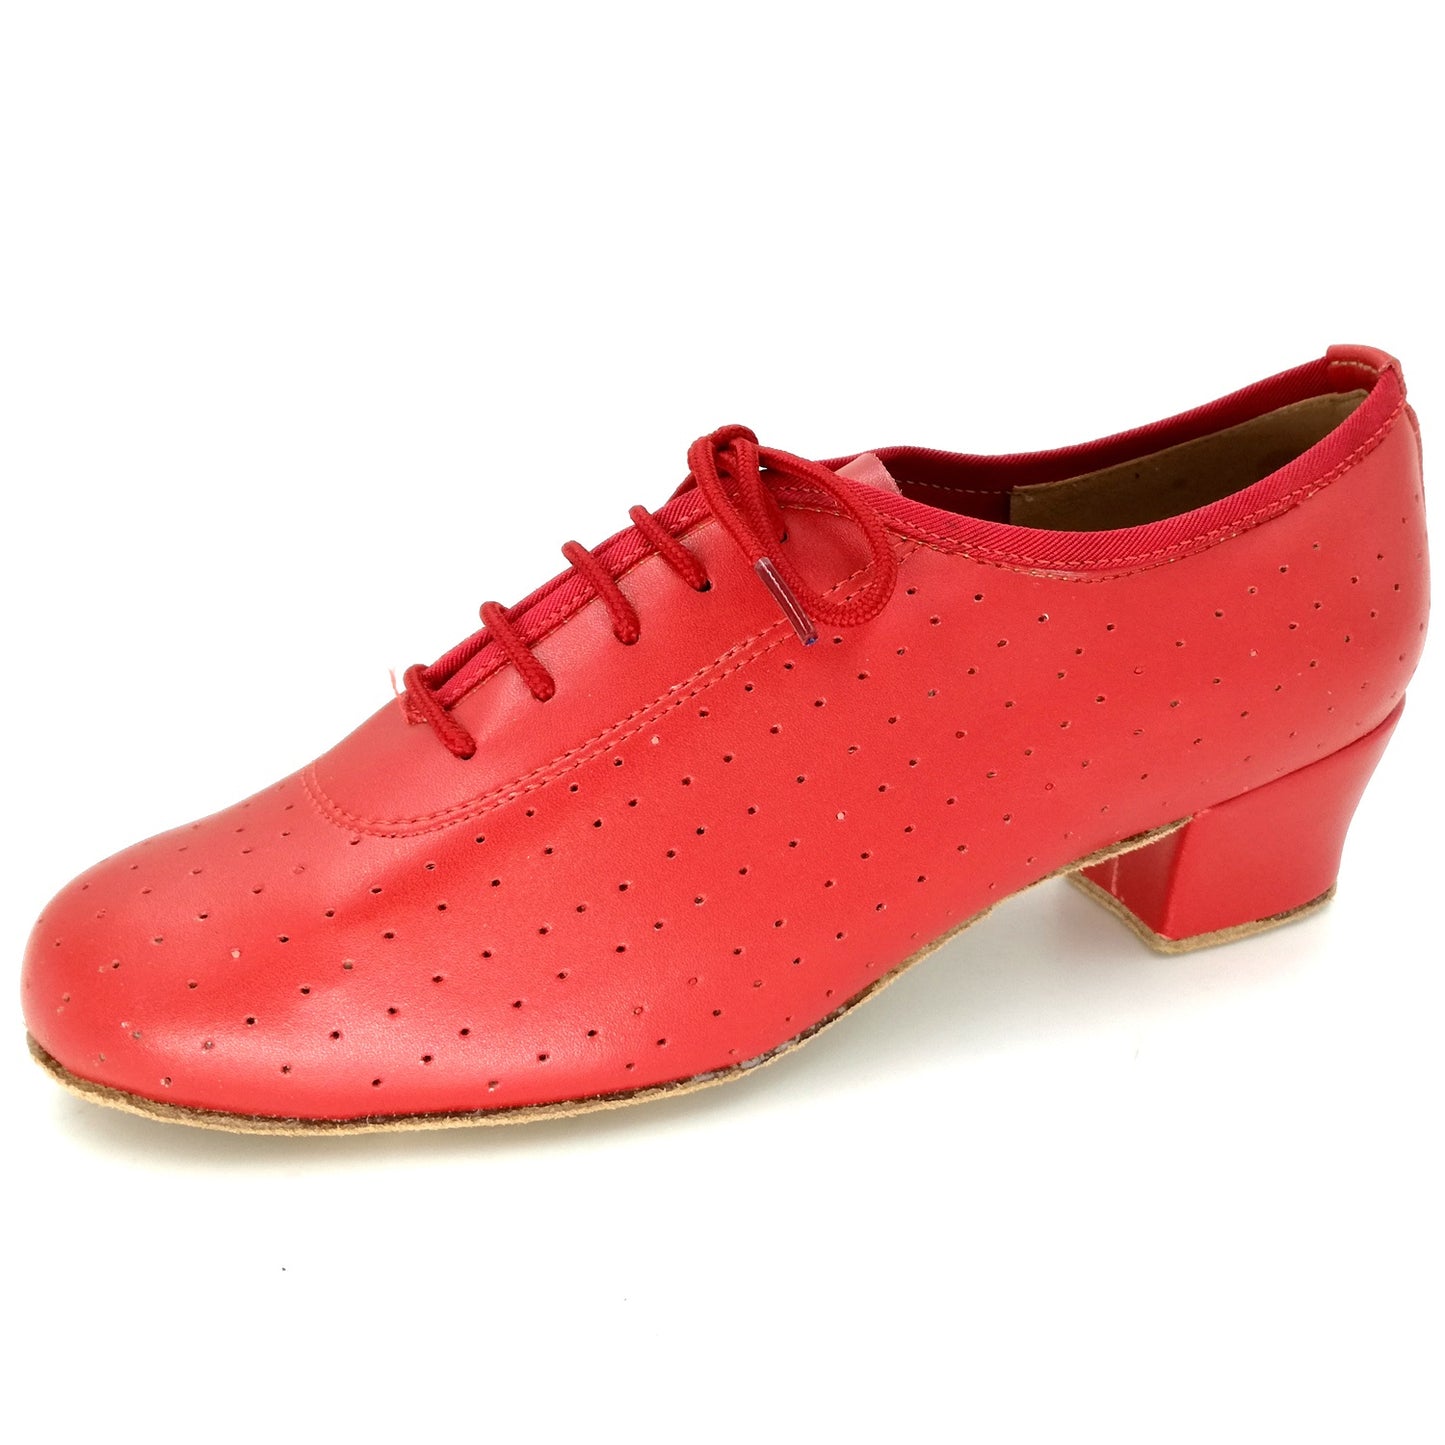 Women Ballroom Dancing Shoes Ladies Tango Latin Practice Dance Shoe Suede Sole Lace-up Closed-toe Red (PD5002F)